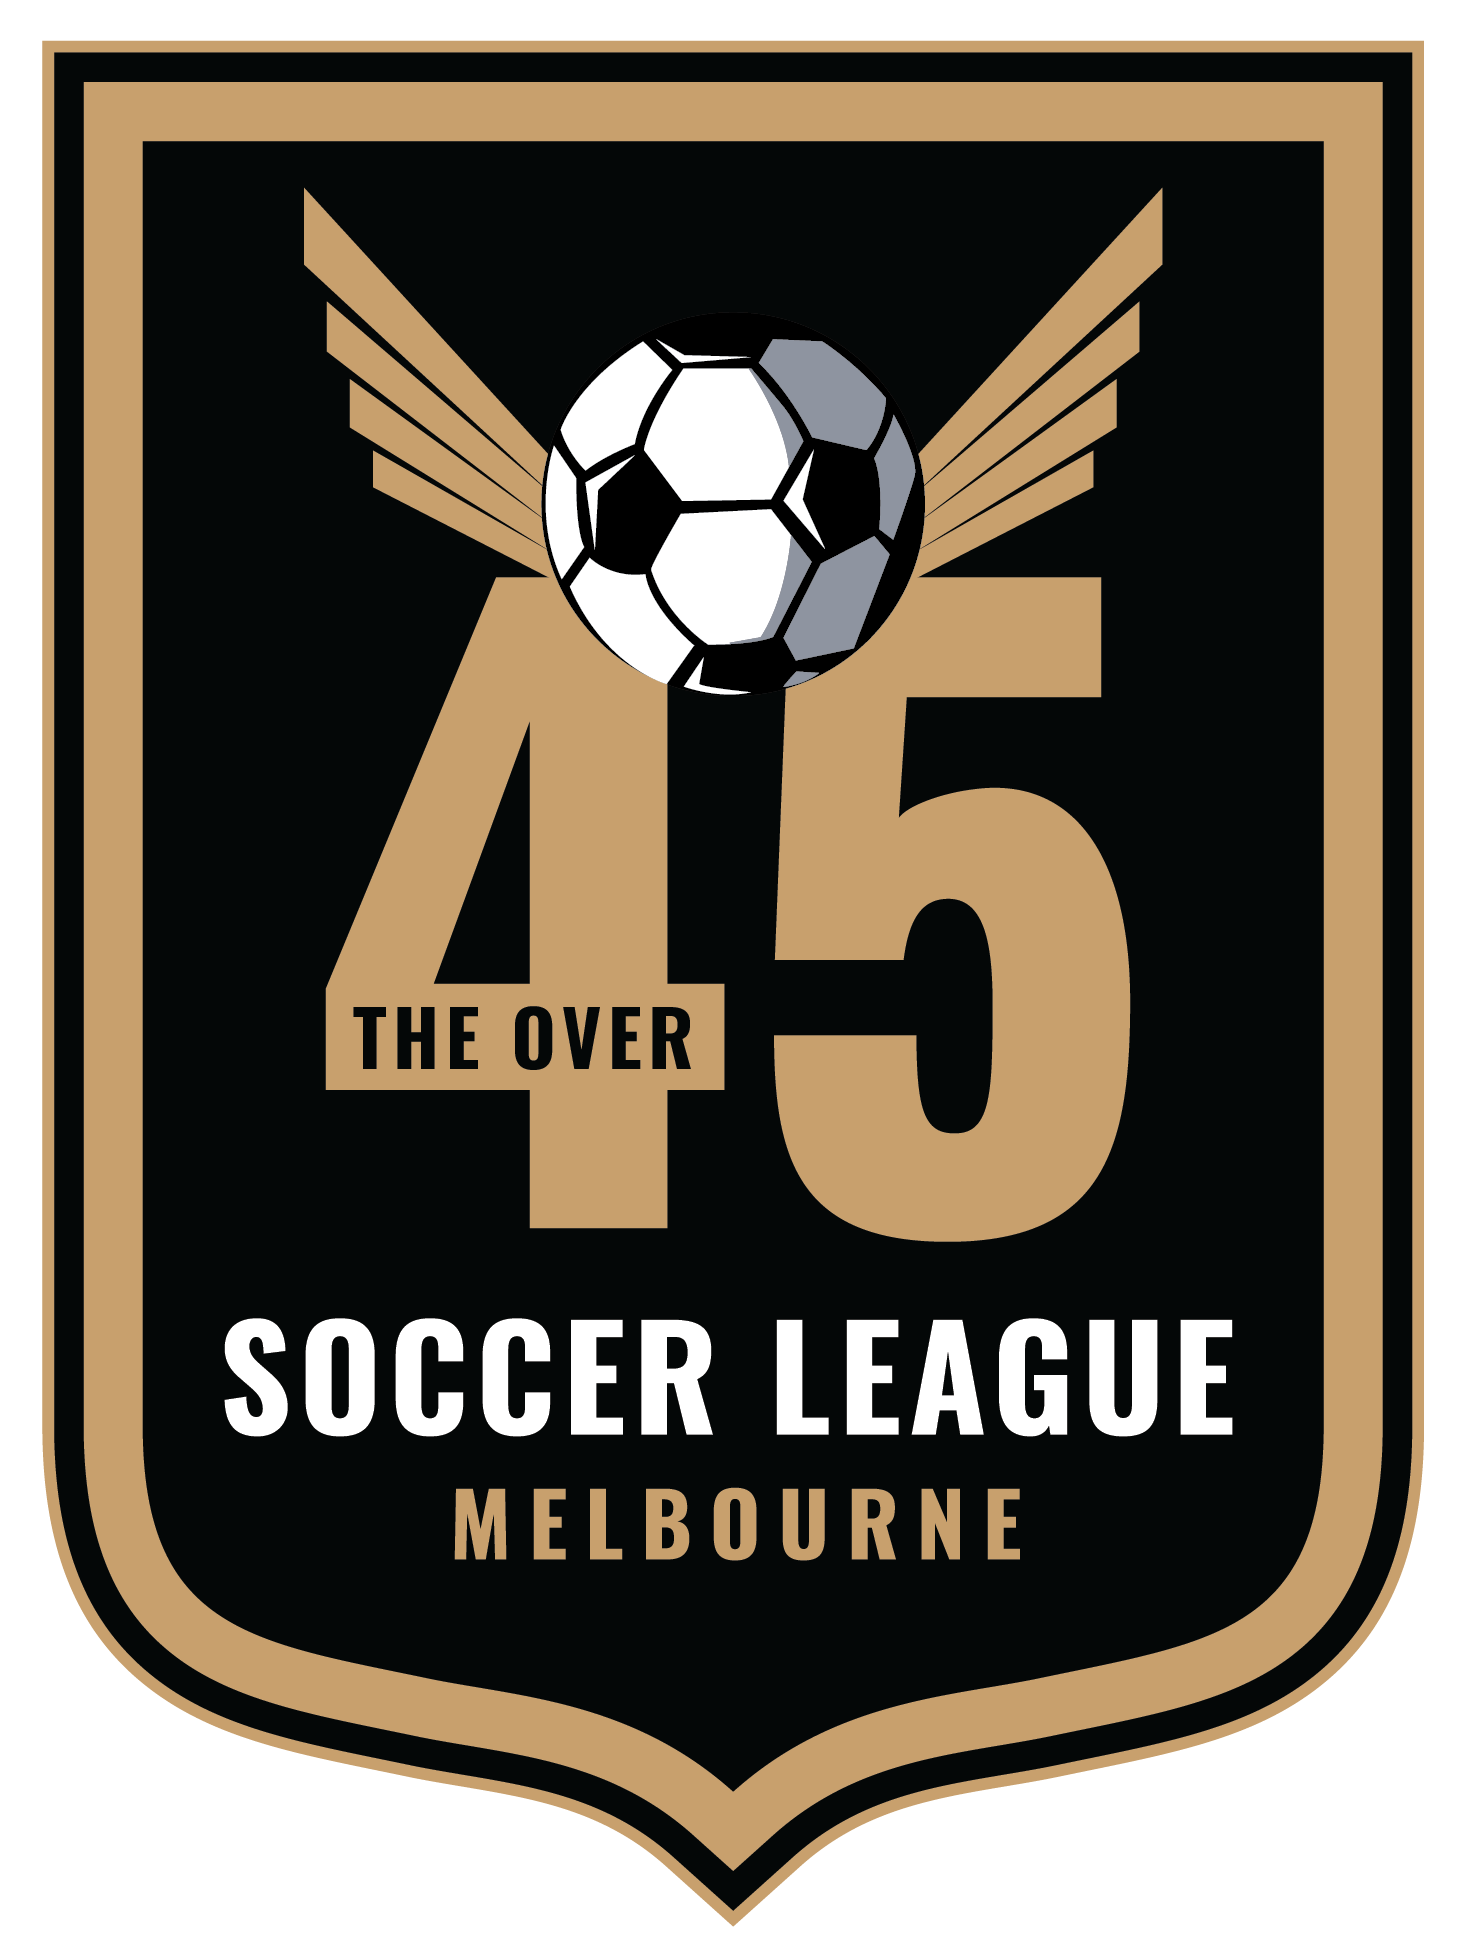 The Over45s Soccer League